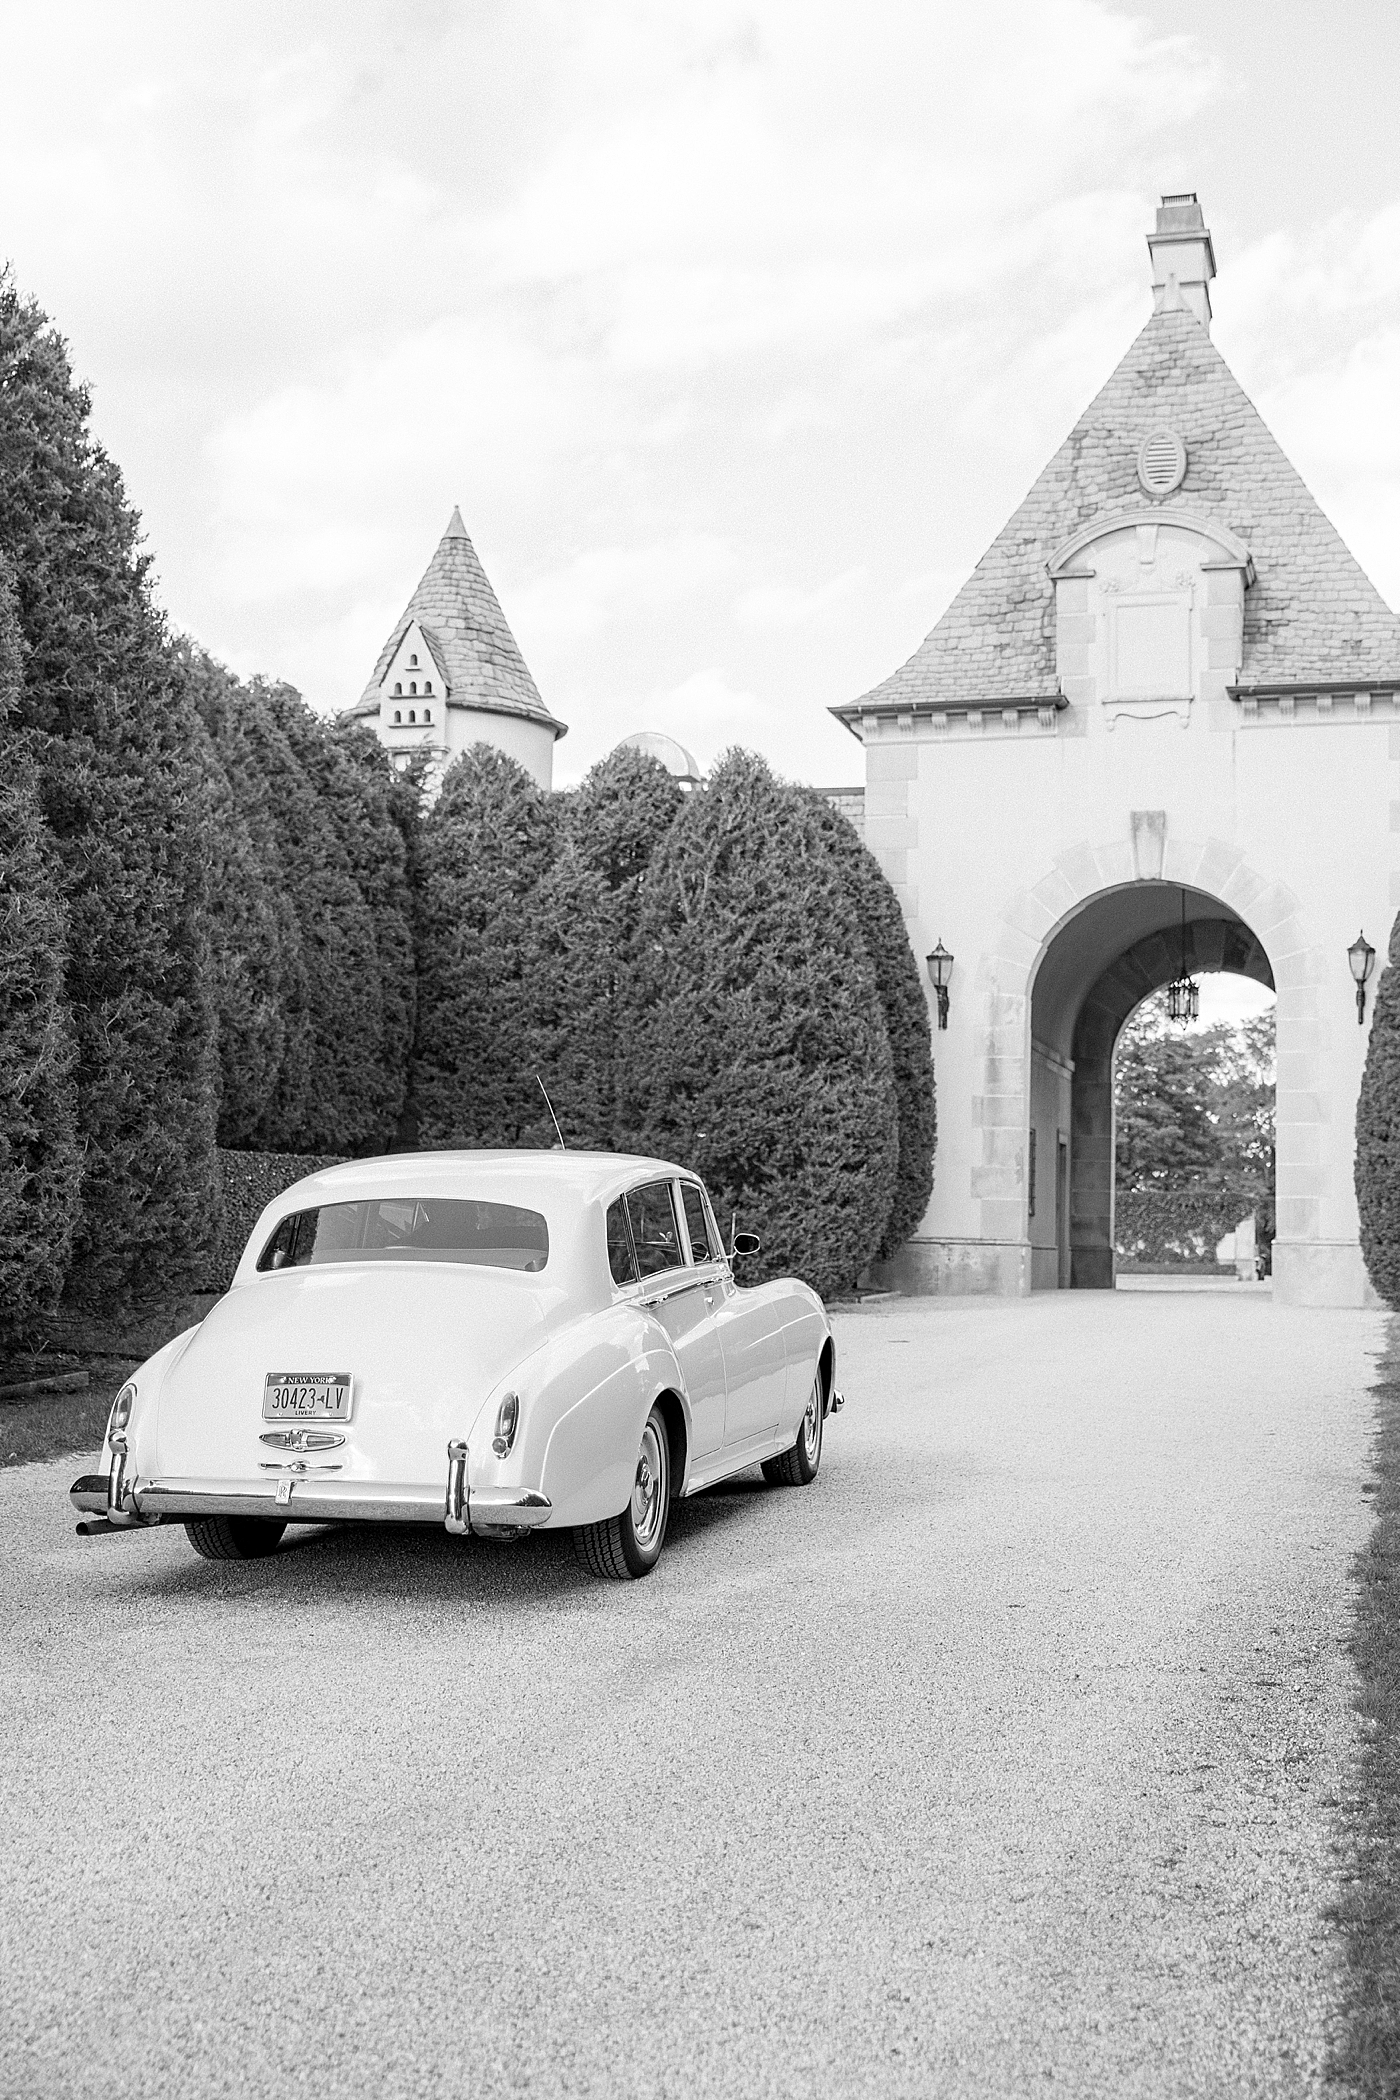 Black and white image of a classic car in a driveway during Oheka castle wedding | Image by Hope Helmuth Photography